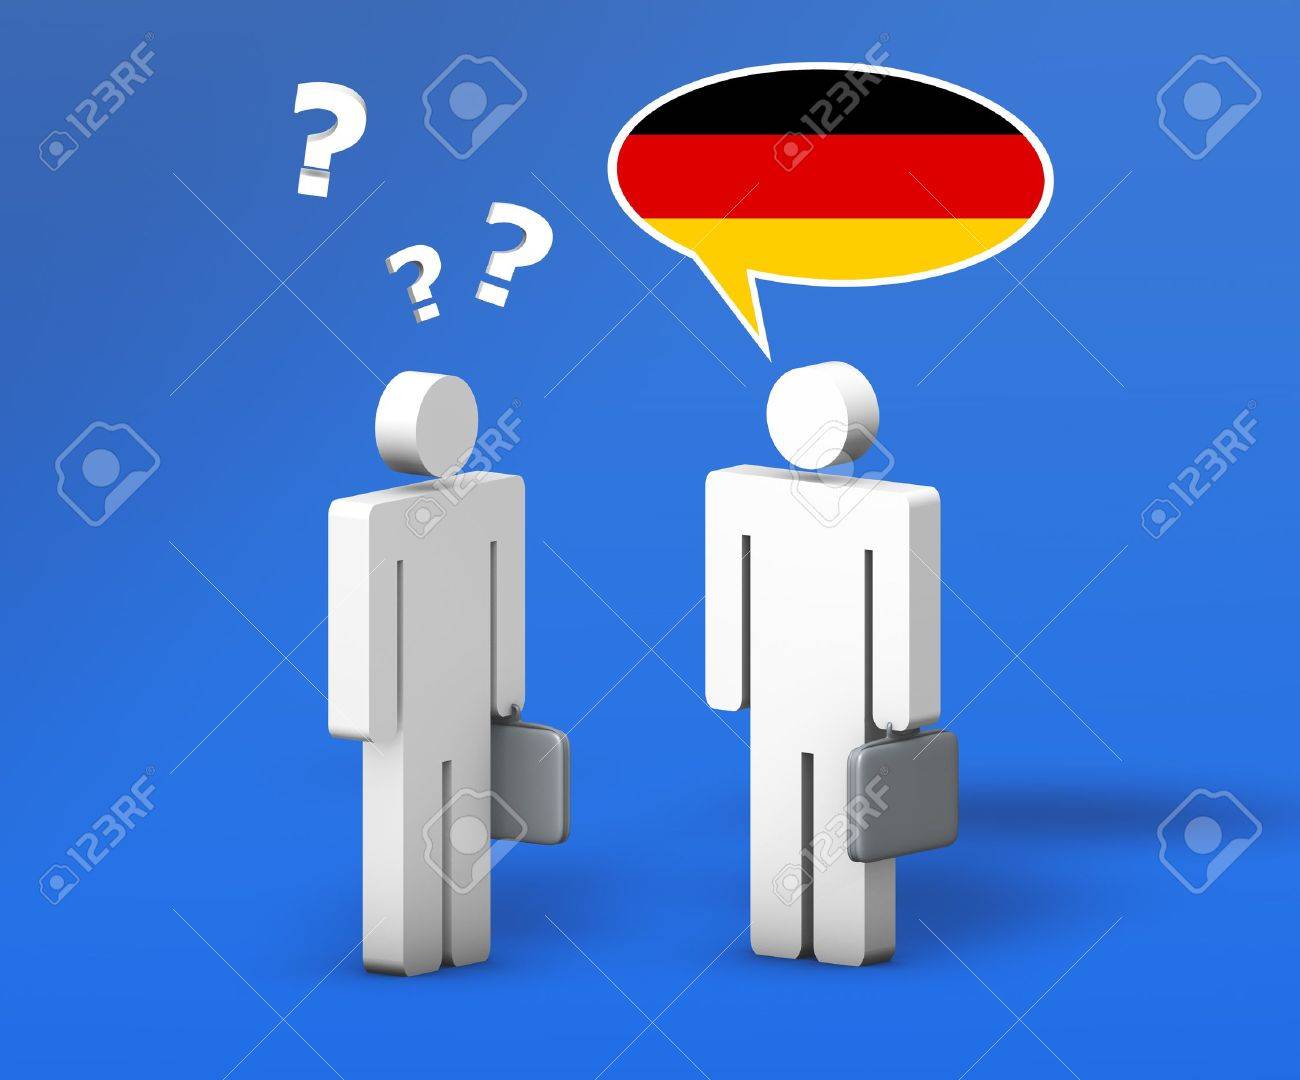 19090006-business-german-concept-with-a-funny-conversation-between-two-3d-people-on-blue-background-the-man-w